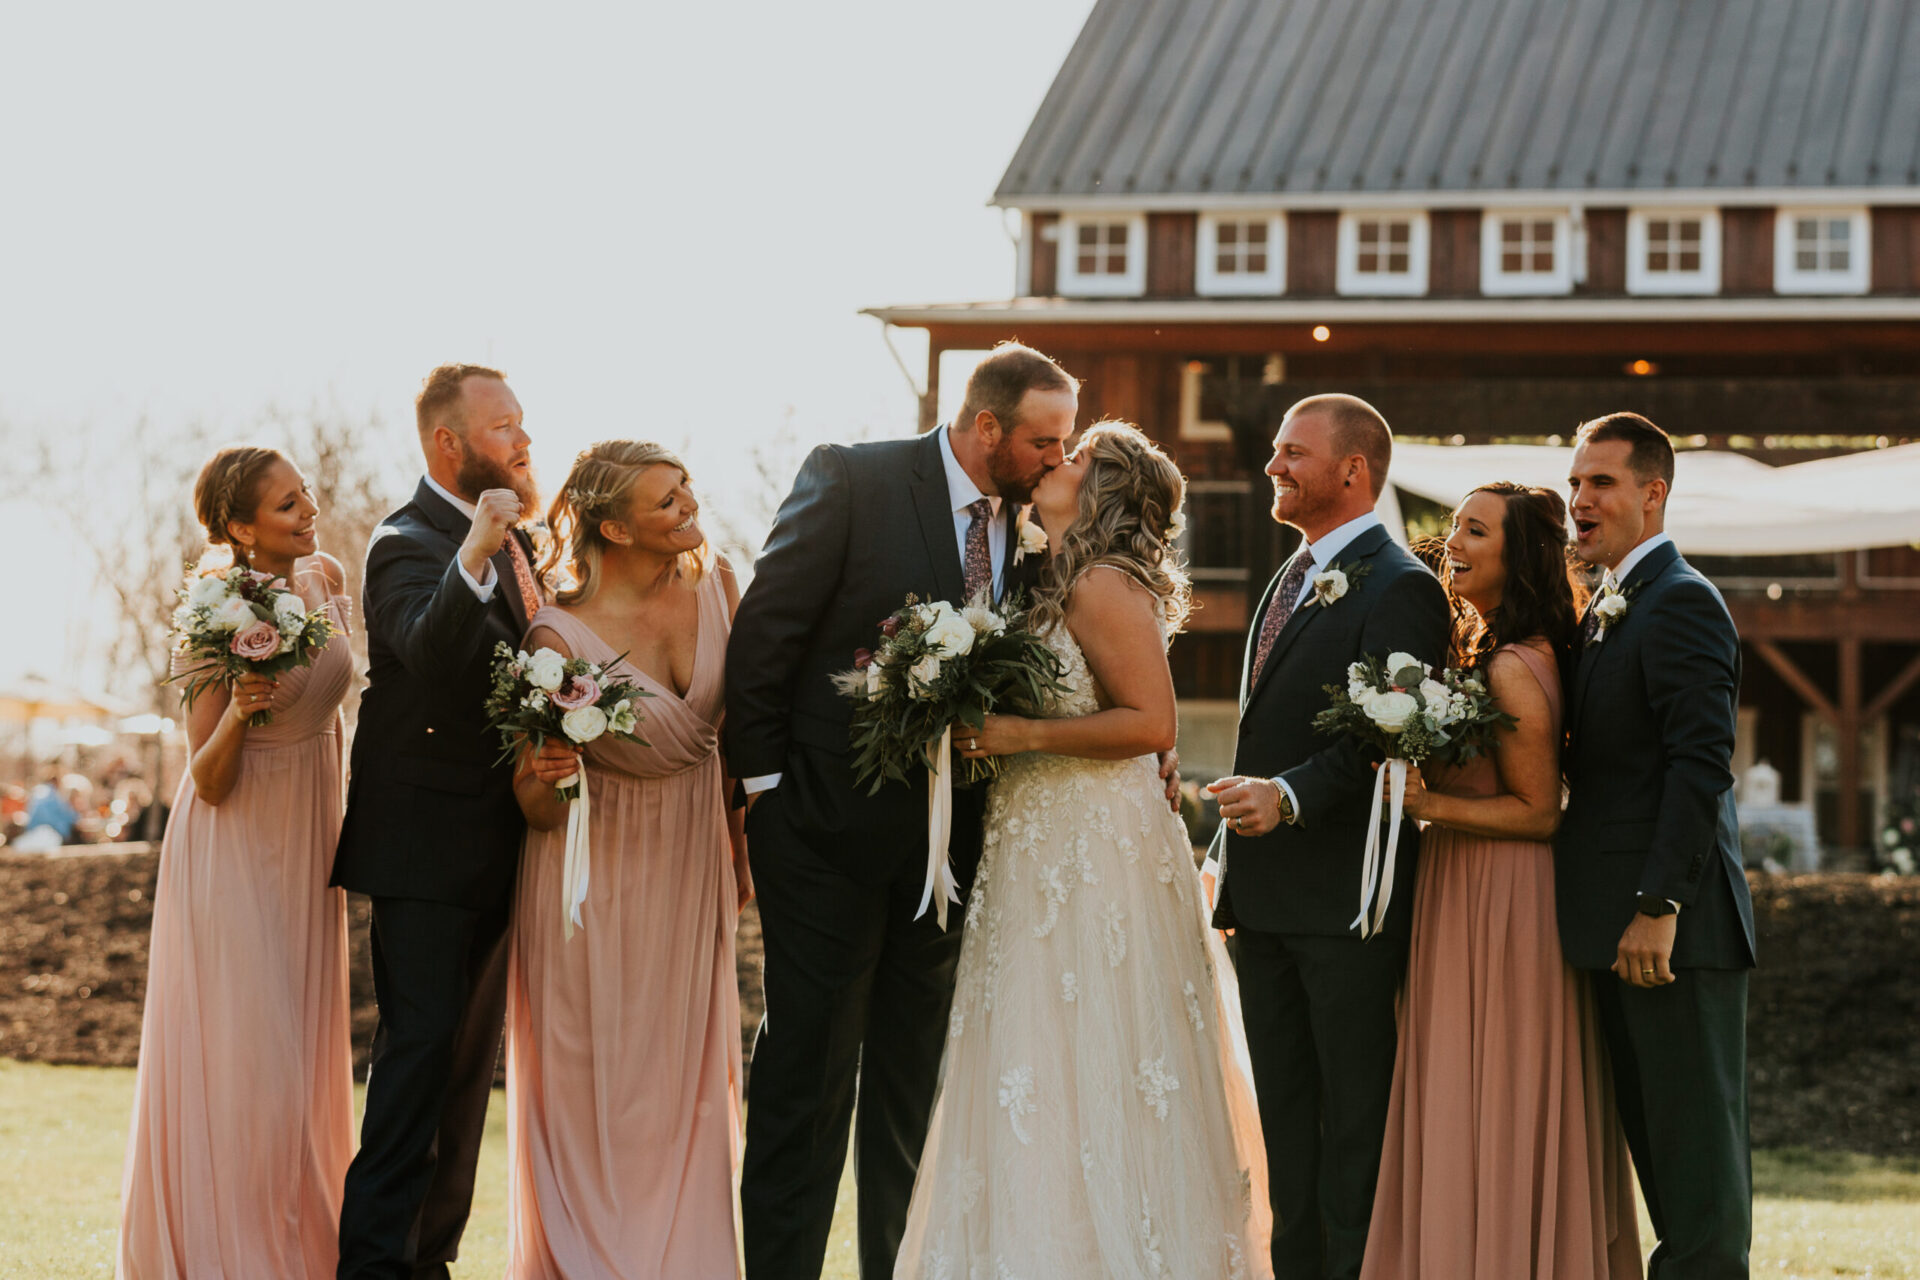 Zion Springs bride groom kissing surrounded by bridesmaids and groomsmen